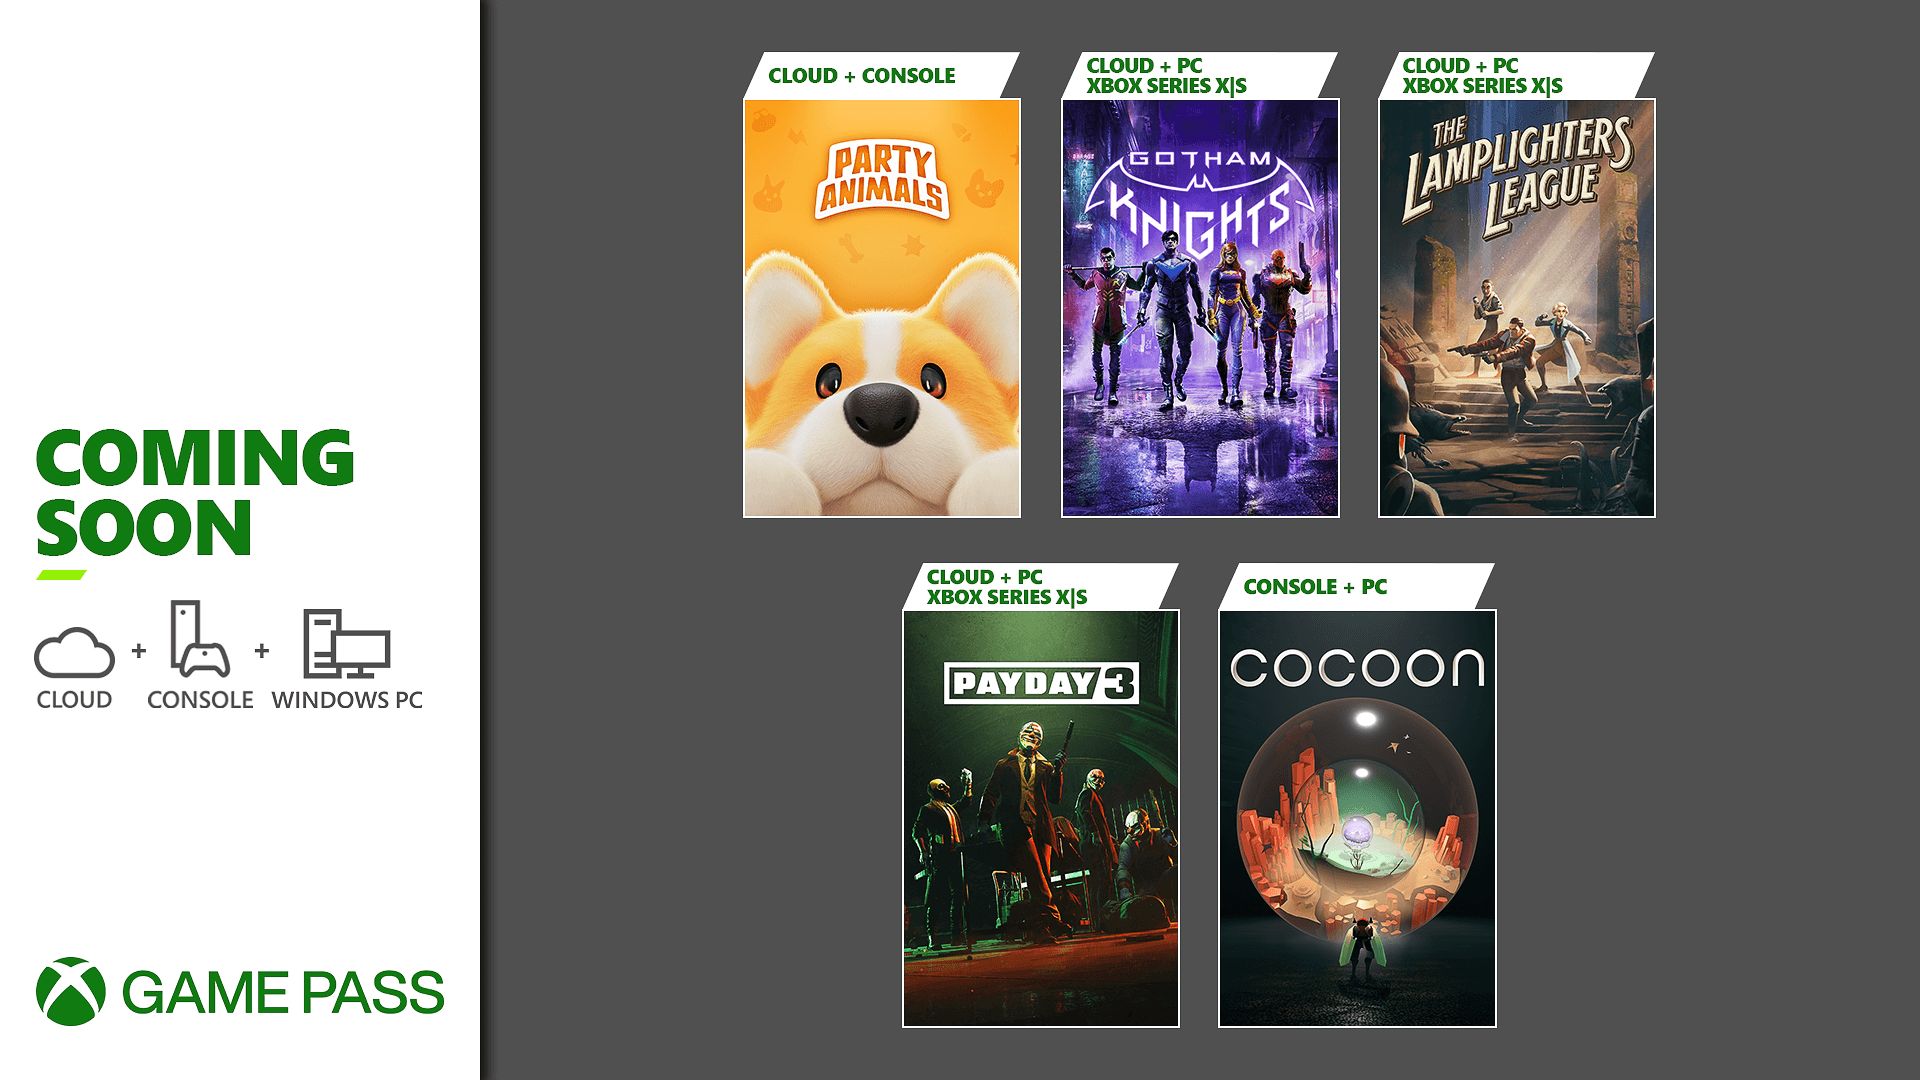 Coming to Xbox Game Pass: Party Animals, Gotham Knights, Payday 3